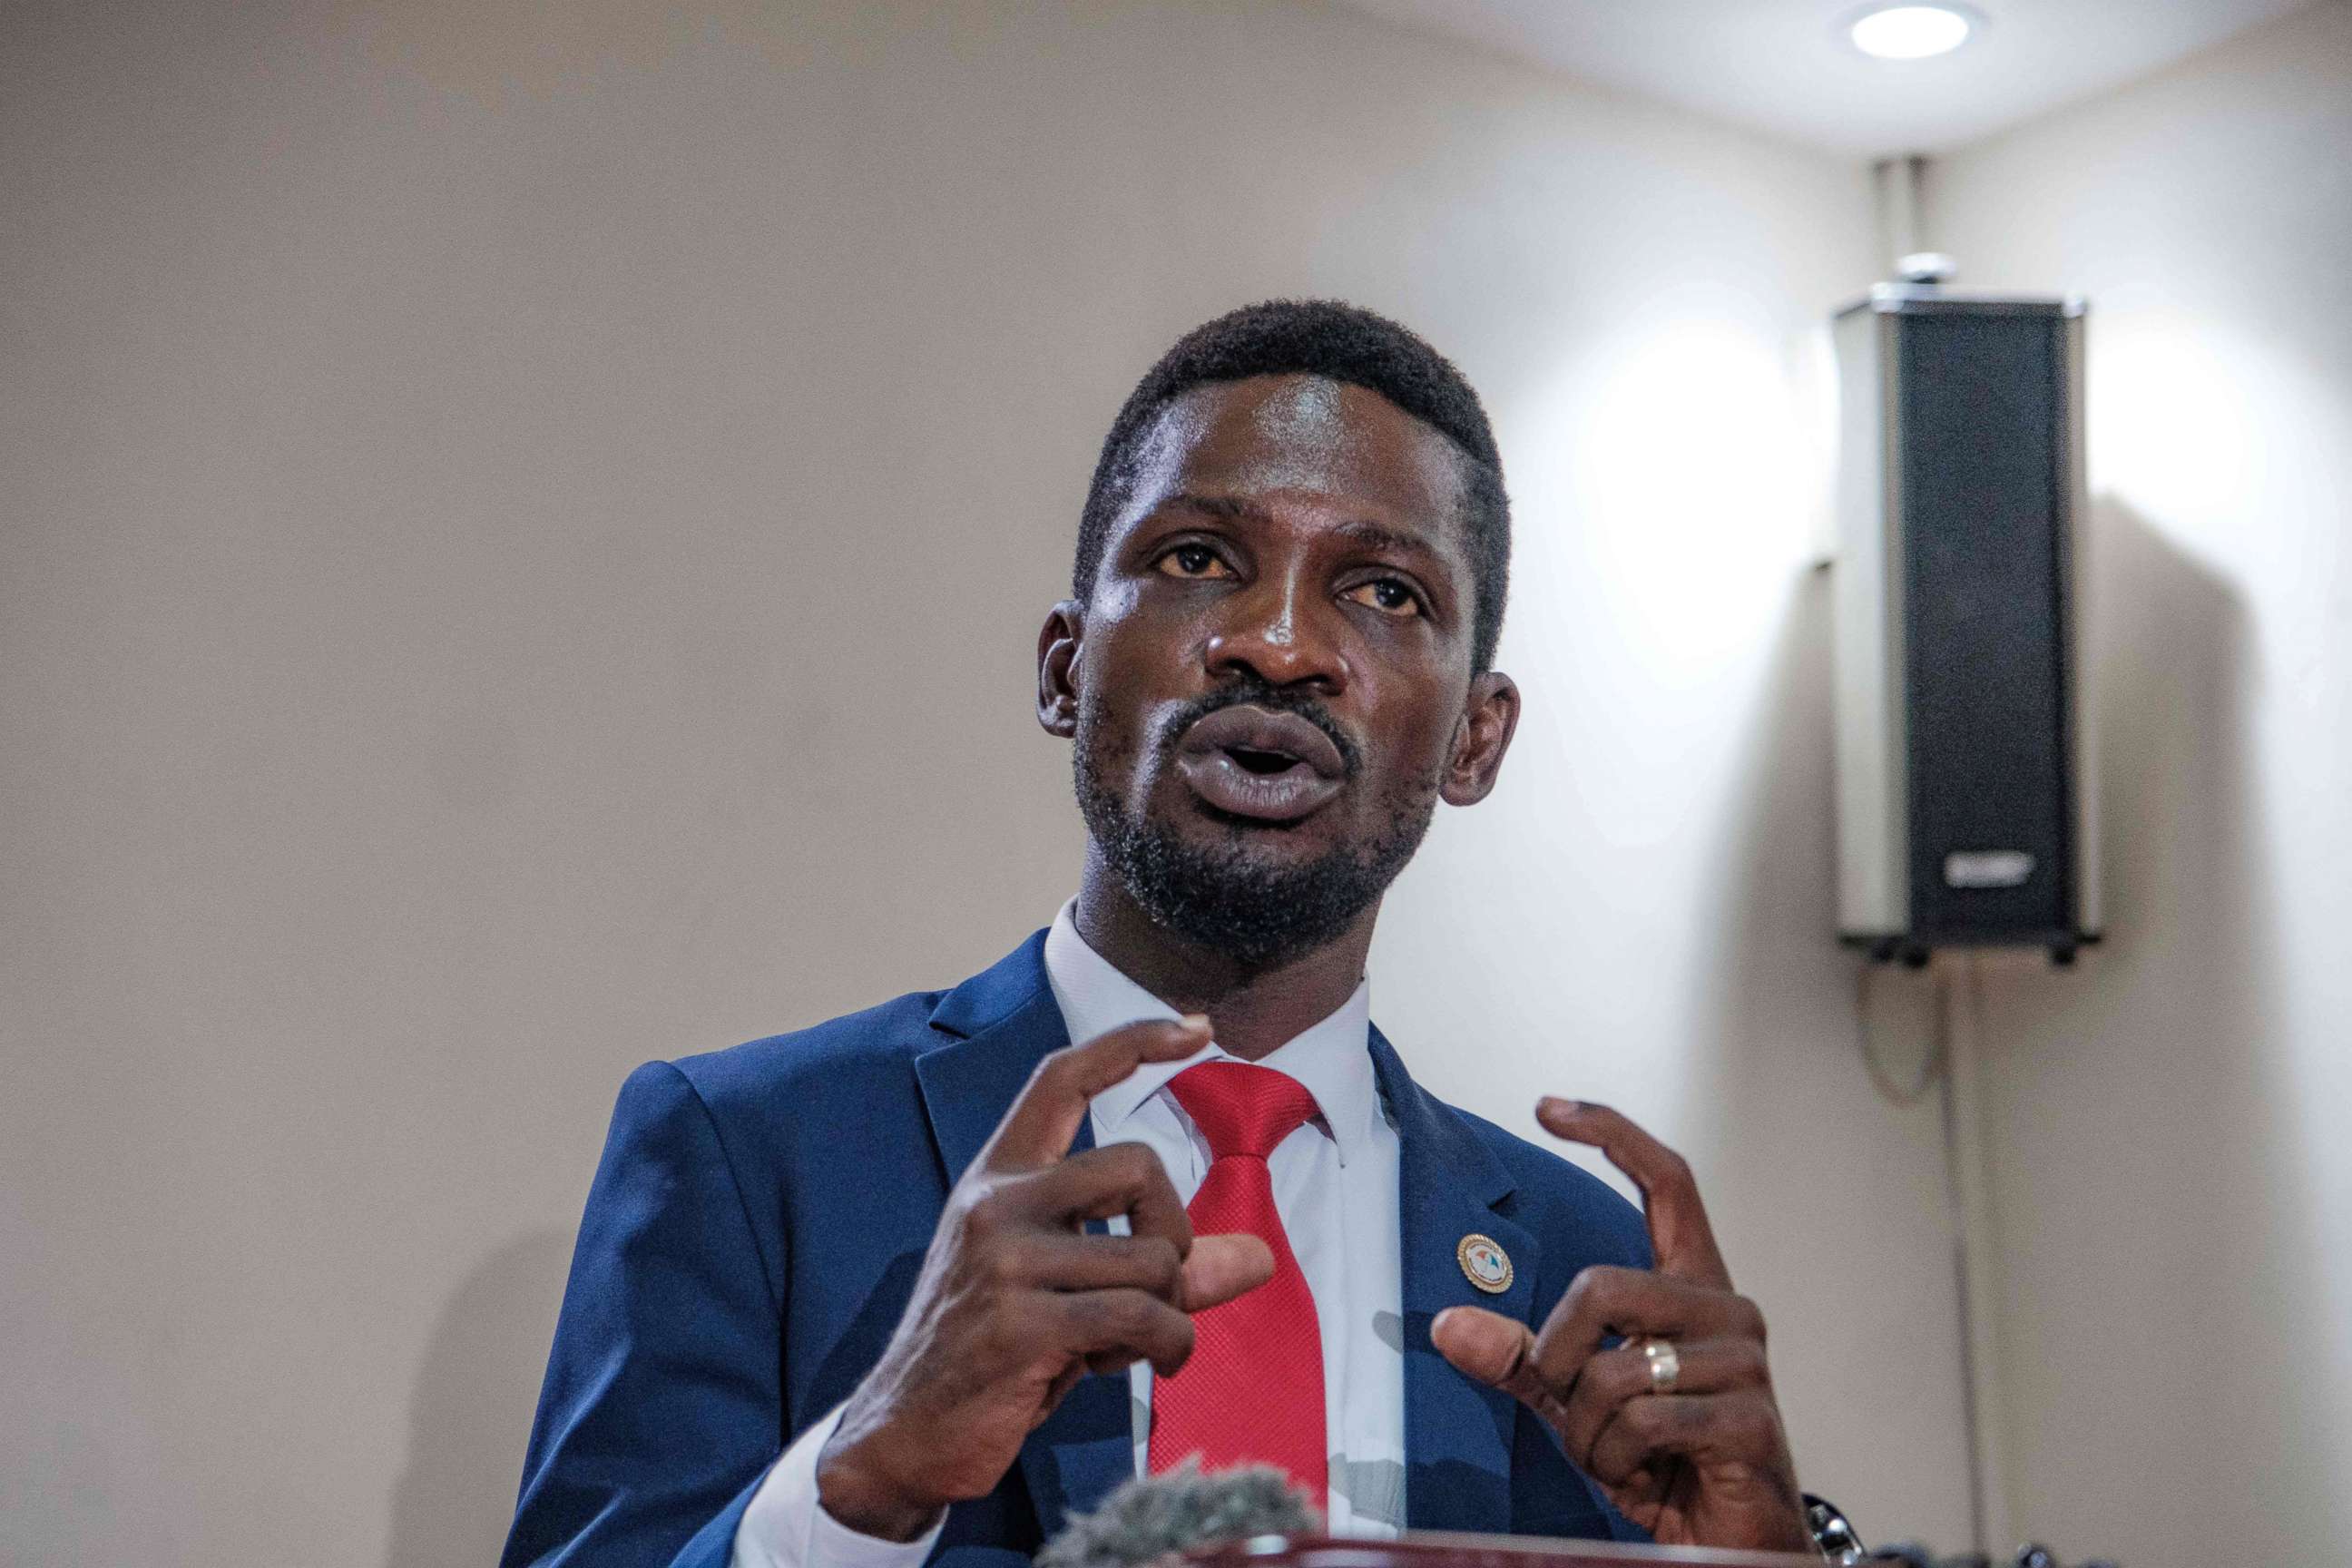 PHOTO: Musician turned politician Robert Kyagulanyi, aka Bobi Wine, also a presidential candidate in the upcoming elections, speaks during a press conference in Kampala, Uganda, Jan. 12, 2021.